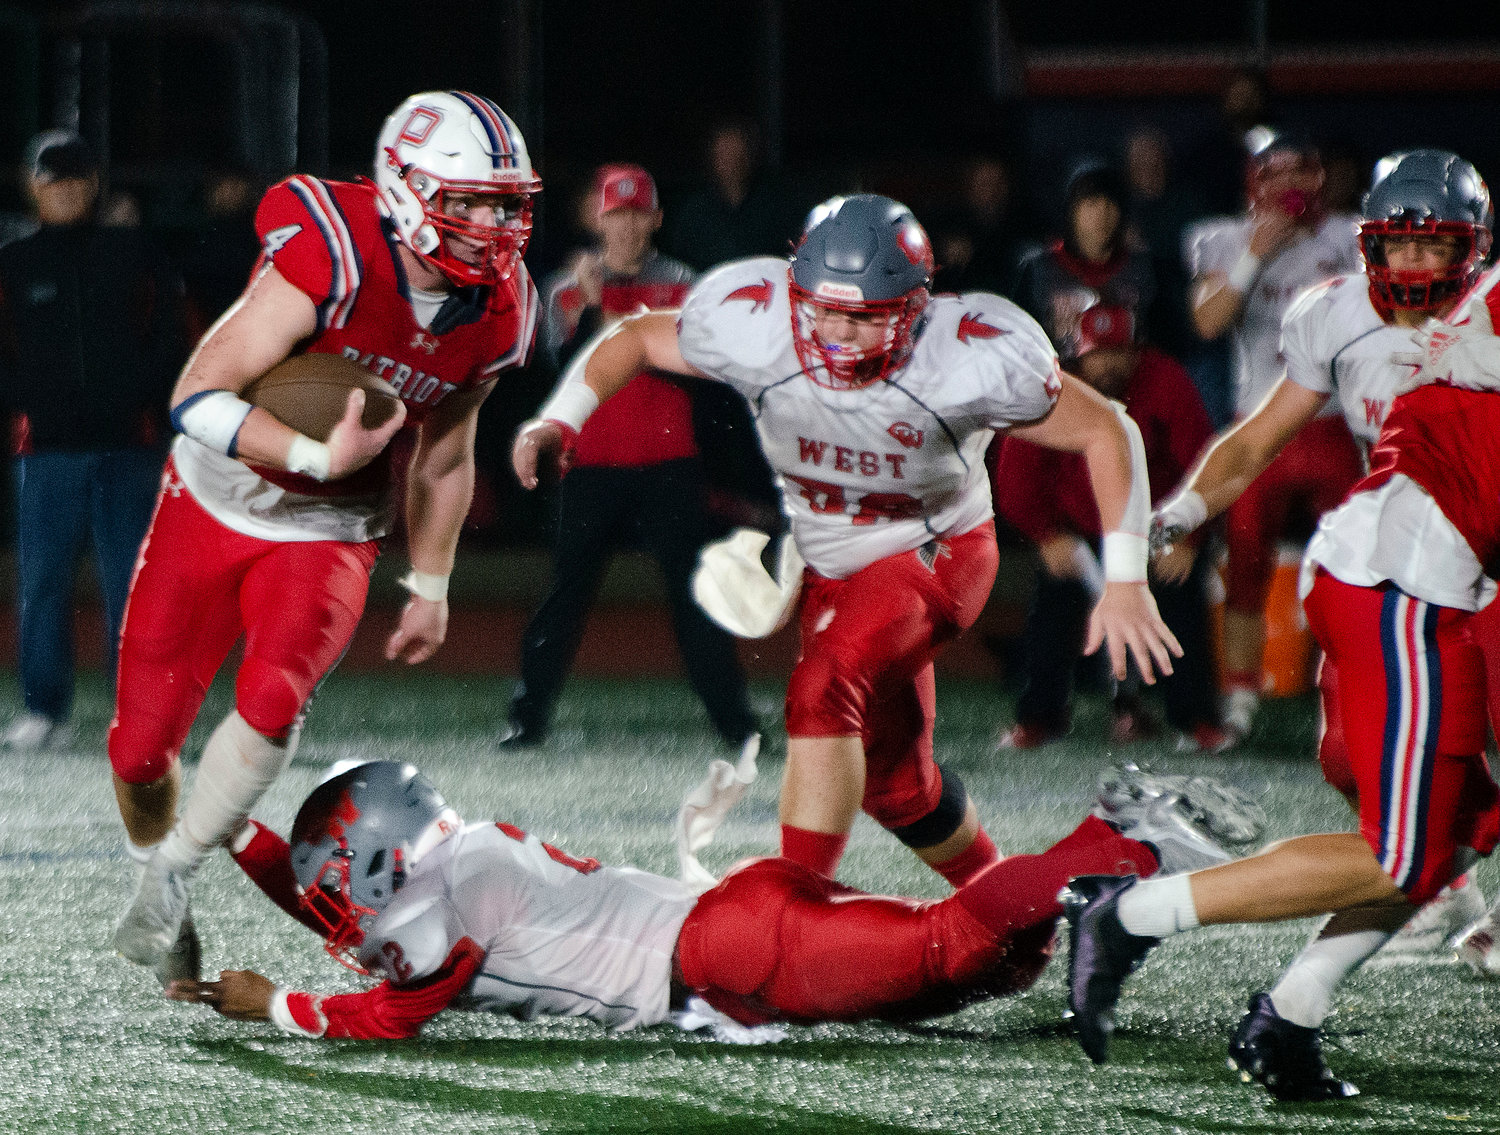 Neal Tullson takes off around the end for a big gain in the second half, leading to the Patriots’ third touchdown.